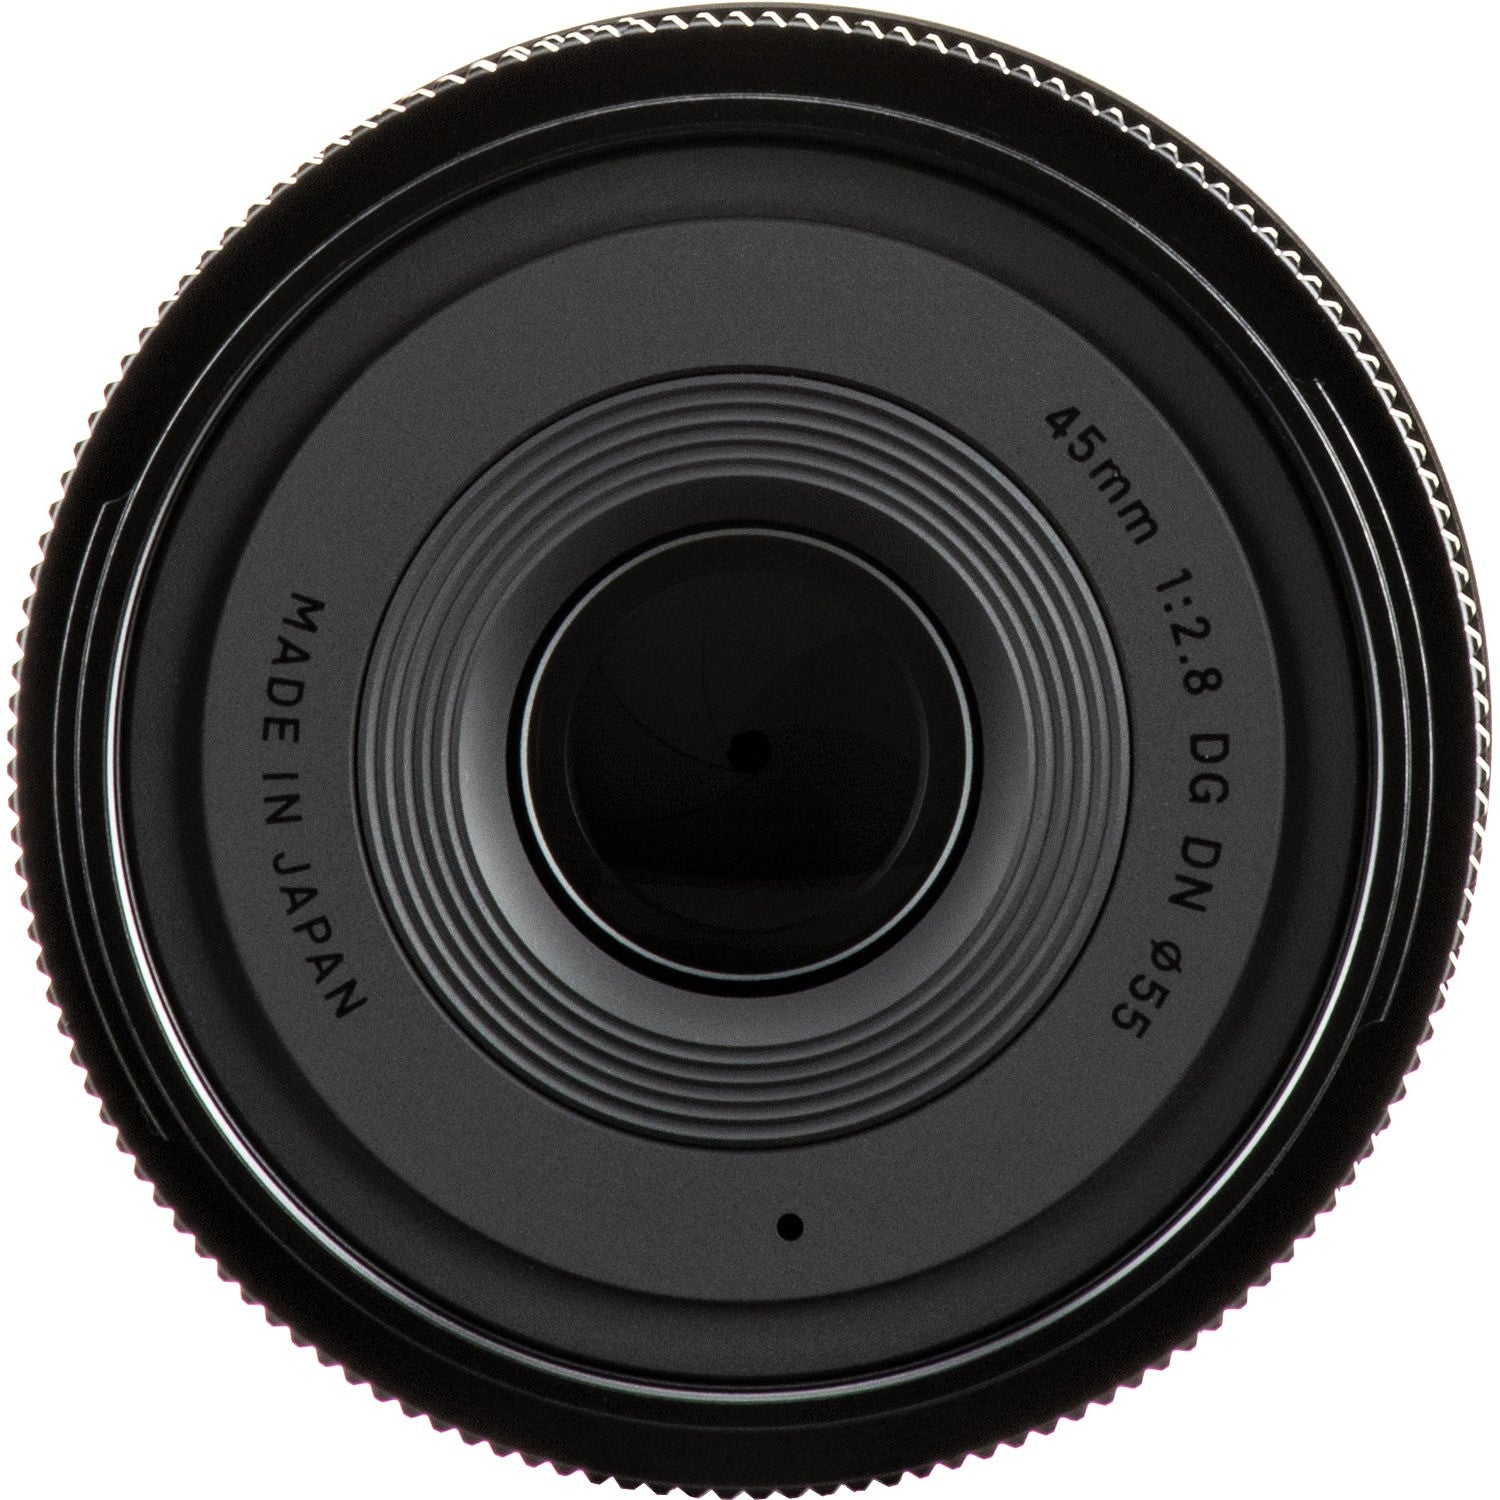 Sigma 45mm F2.8 DG DN Contemporary Lens for Leica L in a Close Up View